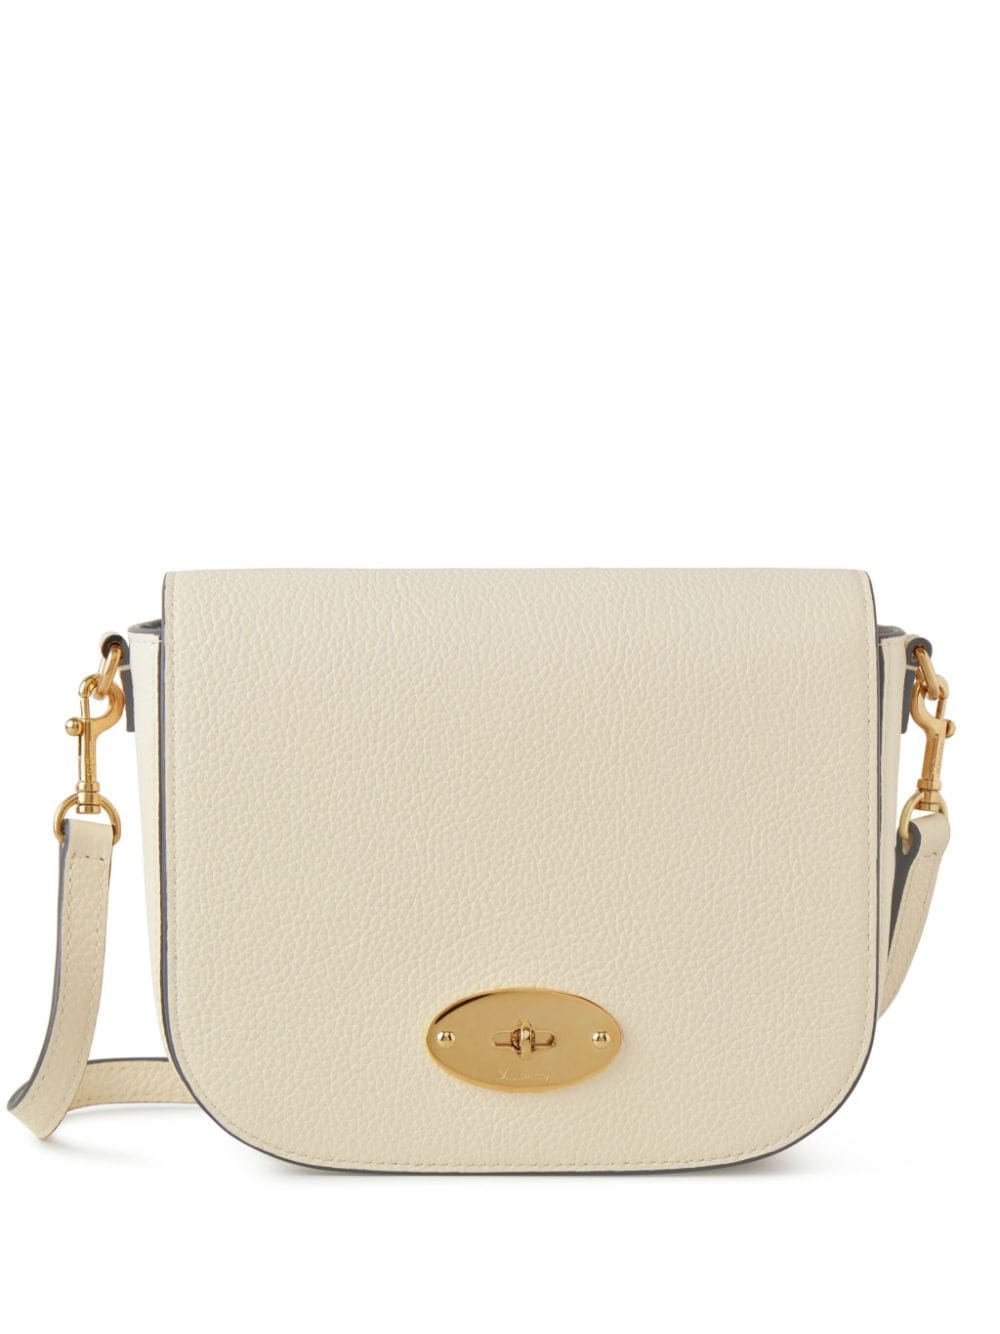 Mulberry Small Darley Leather Satchel In Neutrals